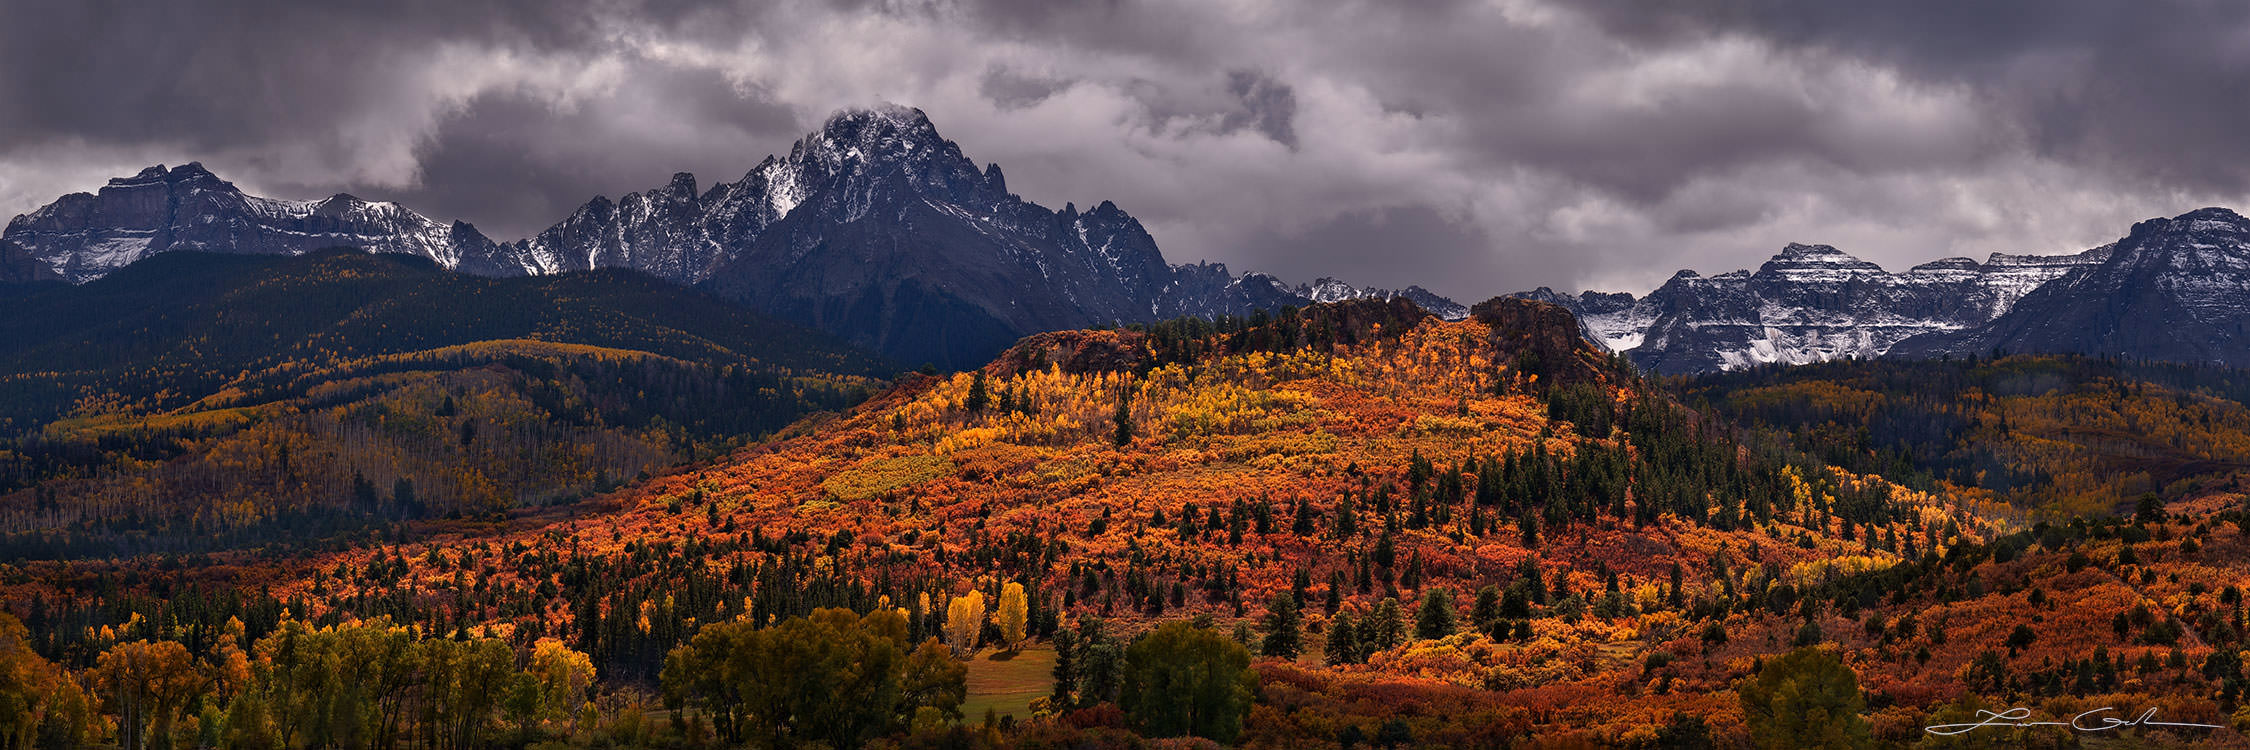 A colorful hill of orange and yellow fall colors, illuminated by light and surrounded by mountains